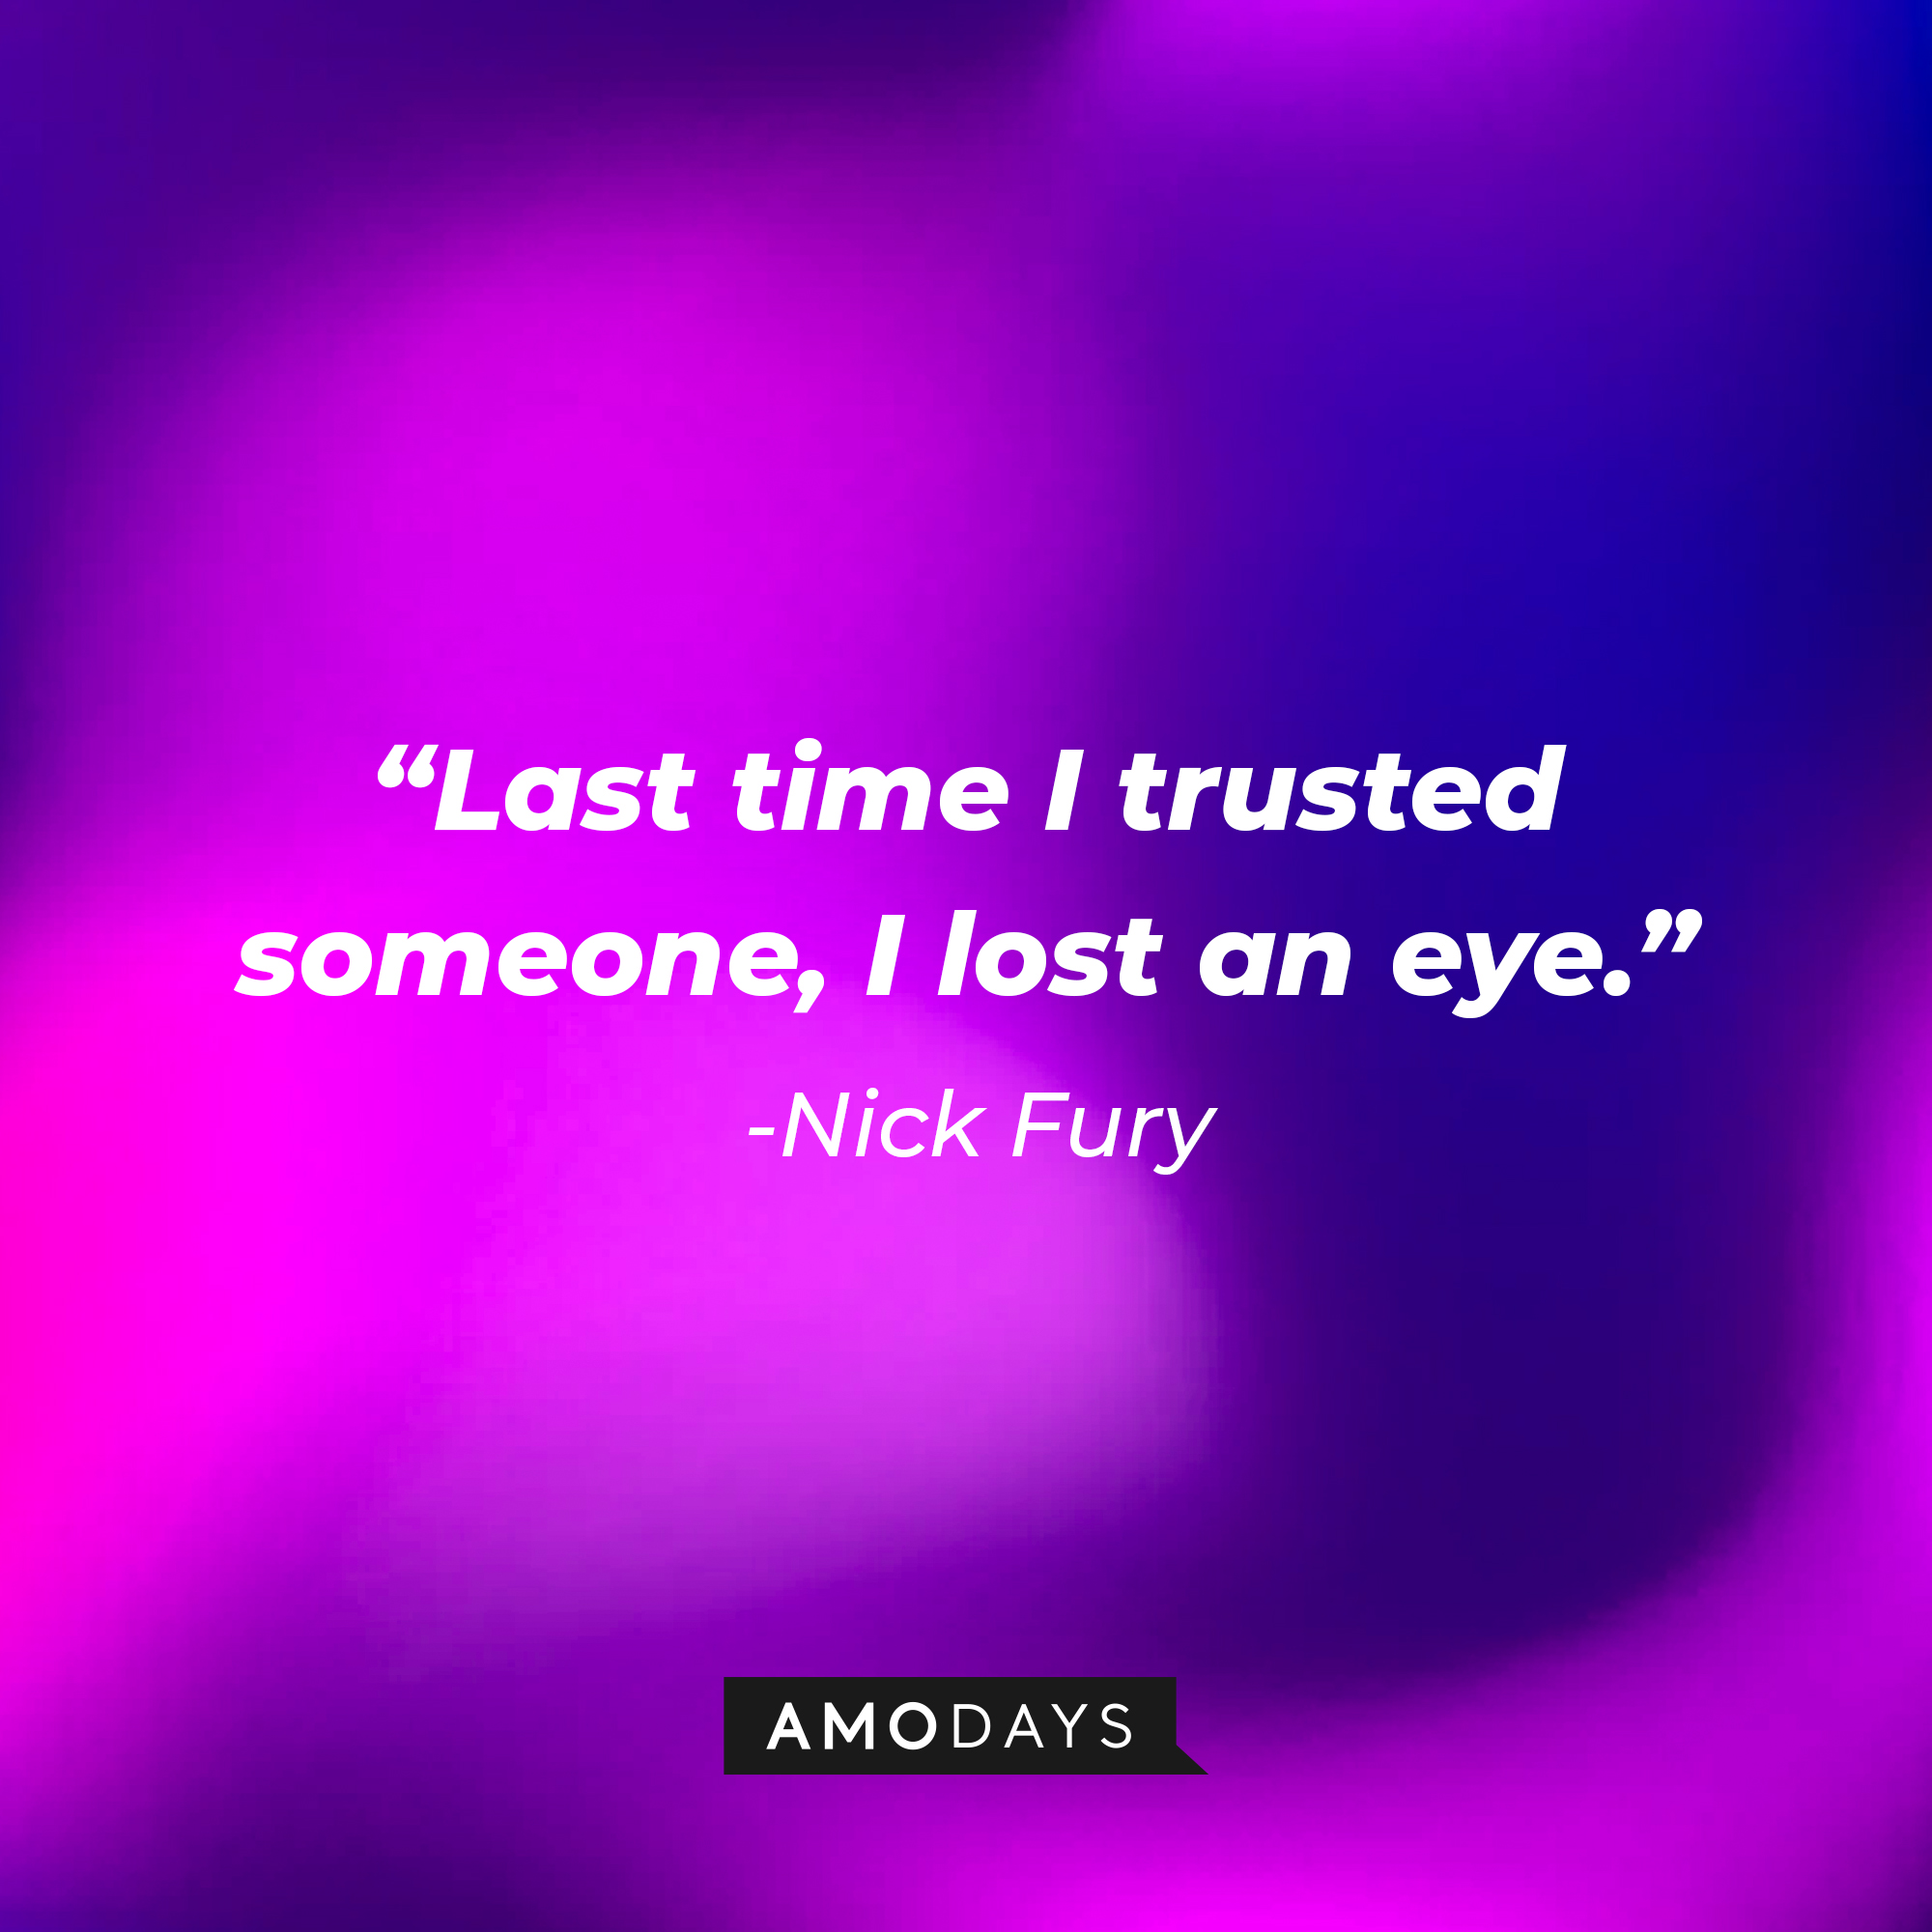 Nick Fury's quote: "Last time I trusted someone, I lost an eye." | Source: AmoDays